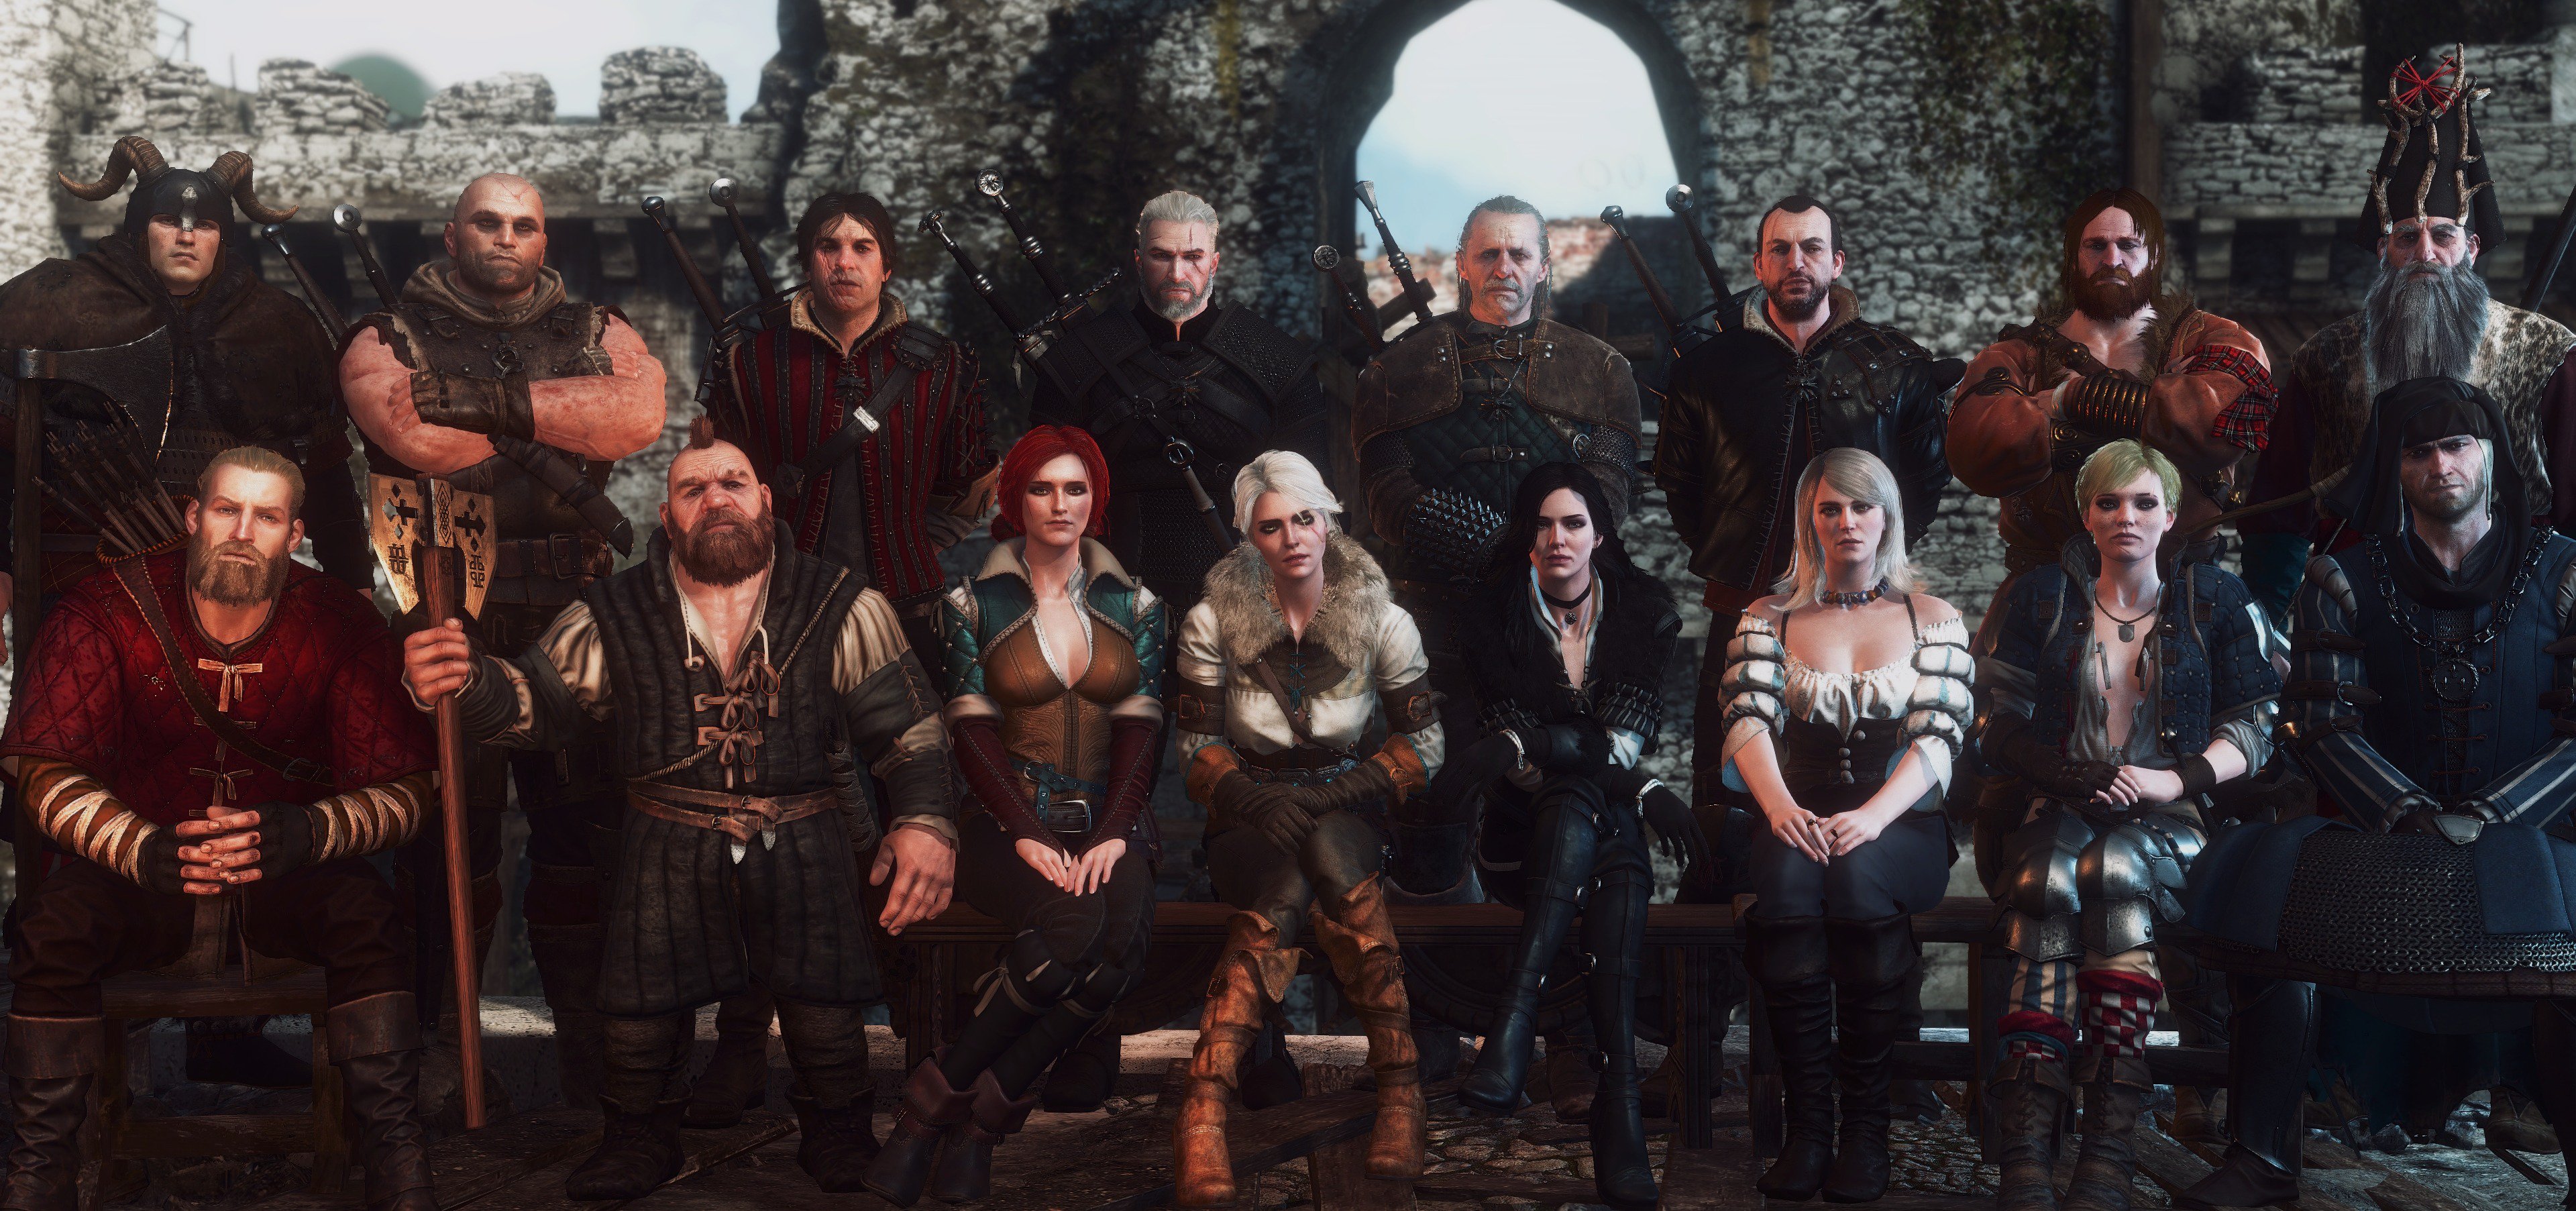 General 3840x1805 The Witcher The Witcher 3: Wild Hunt group of people Kaer Morhen Geralt of Rivia Yennefer of Vengerberg Triss Merigold Vernon Roche Letho Keira Metz Vesemir Eskel Lambert hjalmar an craite Ves Zoltan Chivay Vigi The Loon Folan Ermion battle Mousesack video game characters Cirilla Fiona Elen Riannon frontal view Cyn (The Witcher)